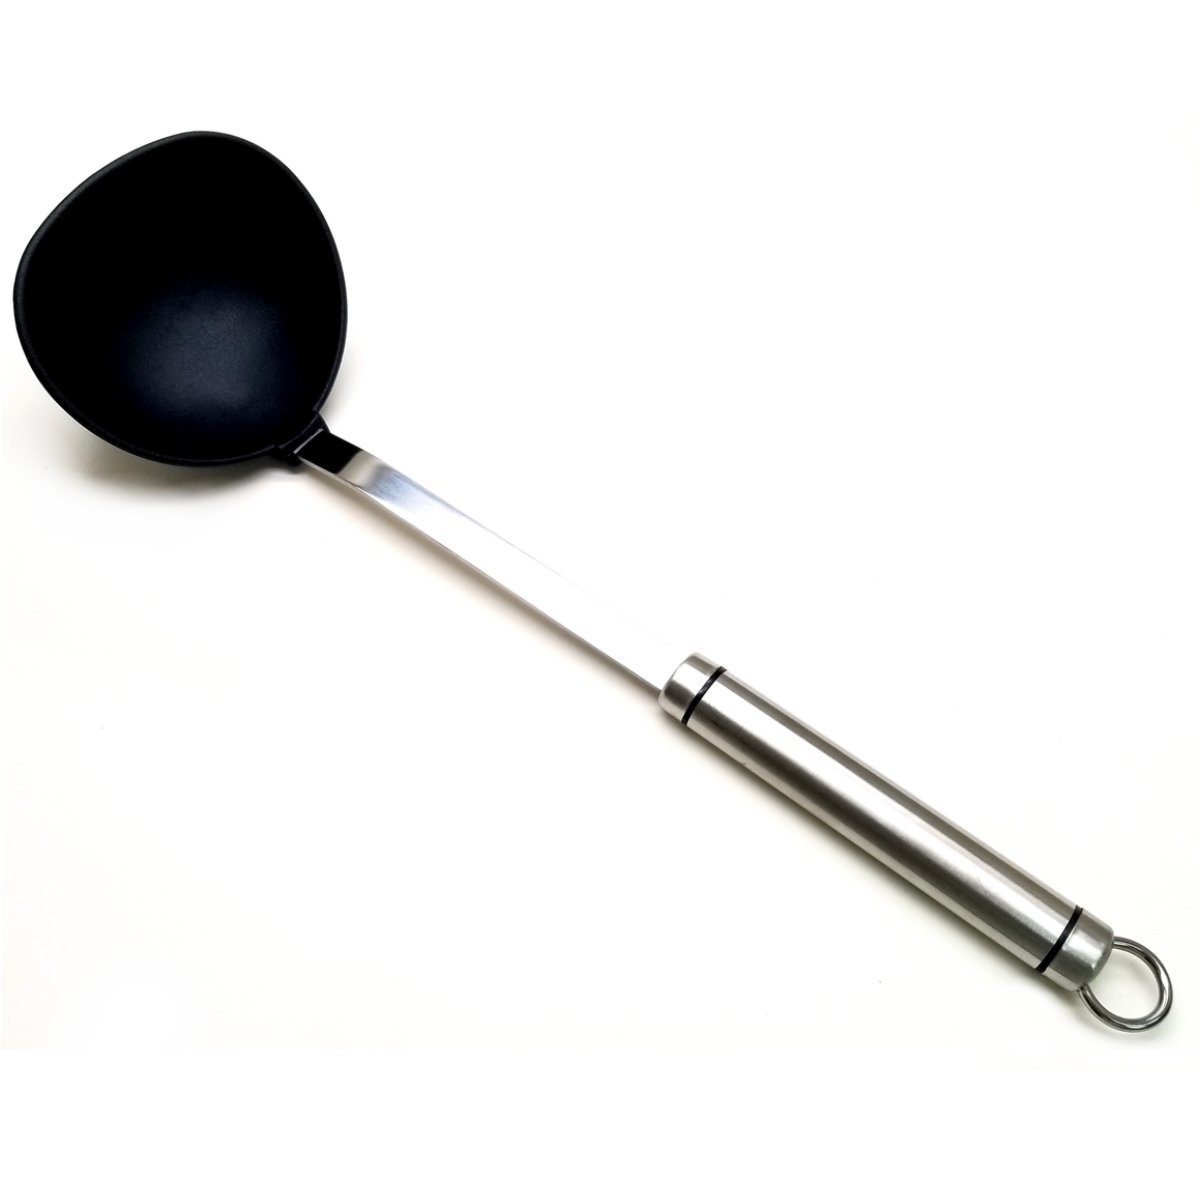 Nylon soup scoop with high-grade stainless steel handle